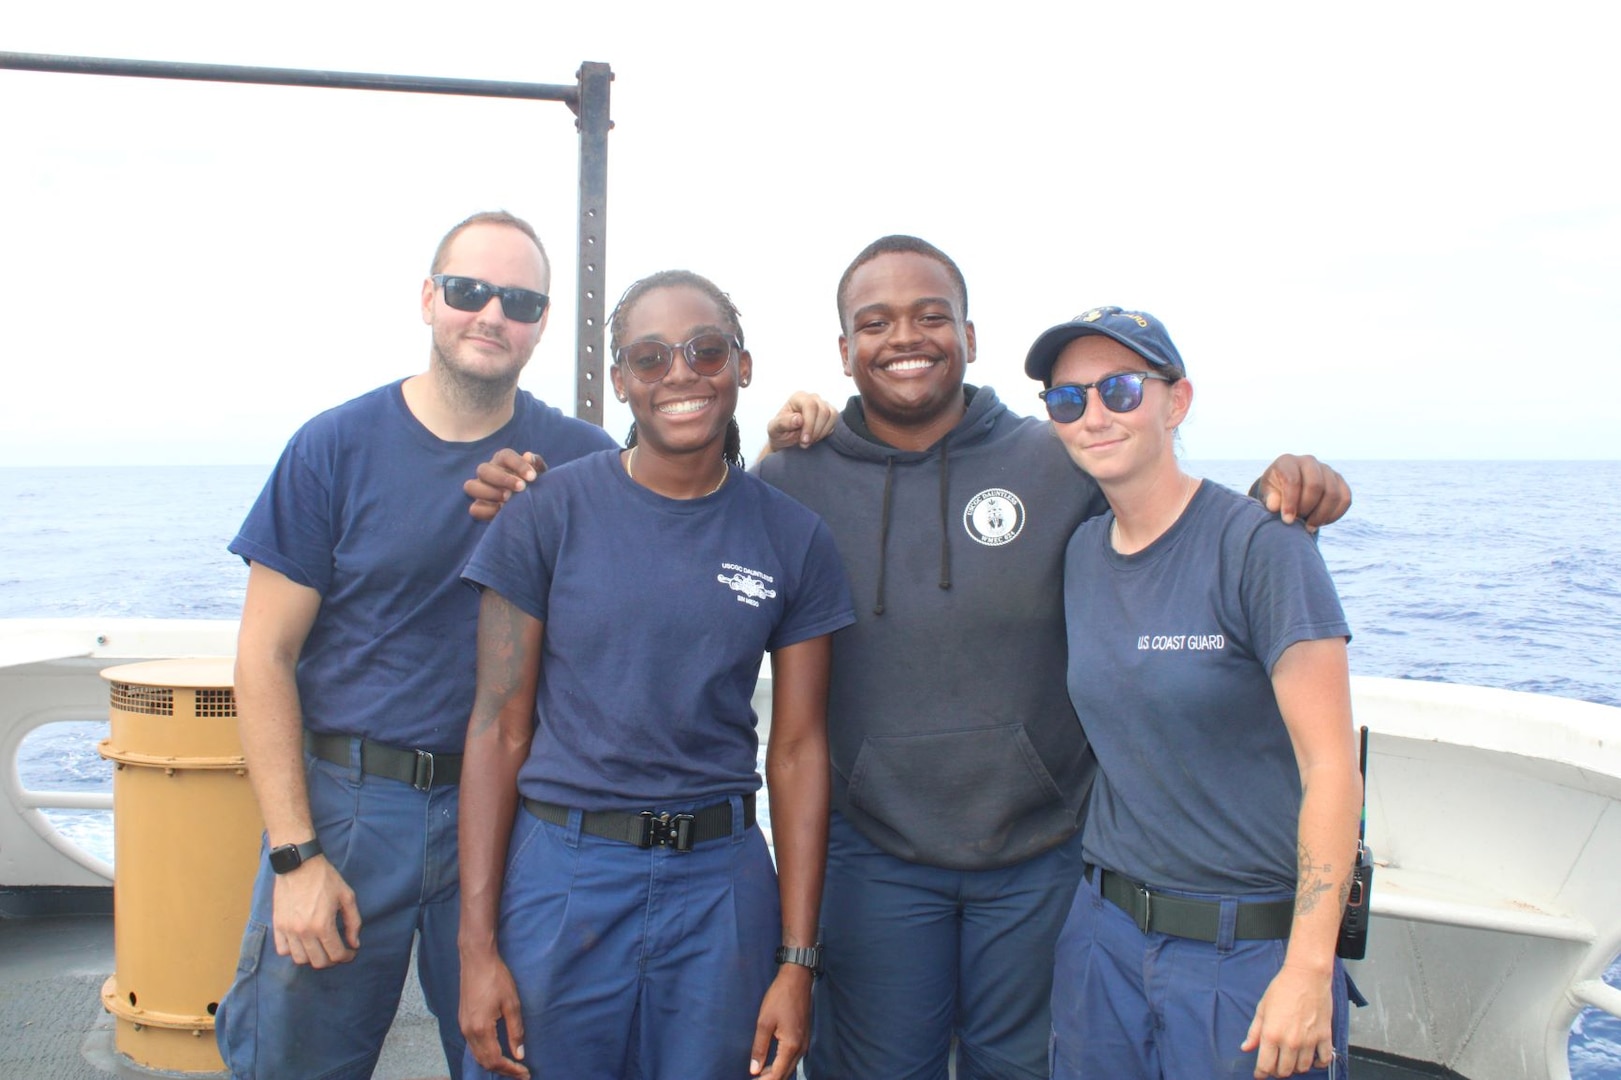 U.S. Coast Guard Seaman Nicholas Krikstan, far left, Seaman Ariayanna Val, Seaman Nur Ibn Al-Islam, and Petty Officer 1st Class Kalie Jones, far right, pose for a group photo aboard the U.S. Coast Guard Cutter Dauntless (WMEC 624), Aug. 10, 2023, in the Windward Passage. The Dauntless' crew returned to their homeport, Aug. 19, 2023, in Pensacola following a 42-day patrol in the Windward Pass. (U.S. Coast Guard photo by Ensign Olivia Gonzalez)